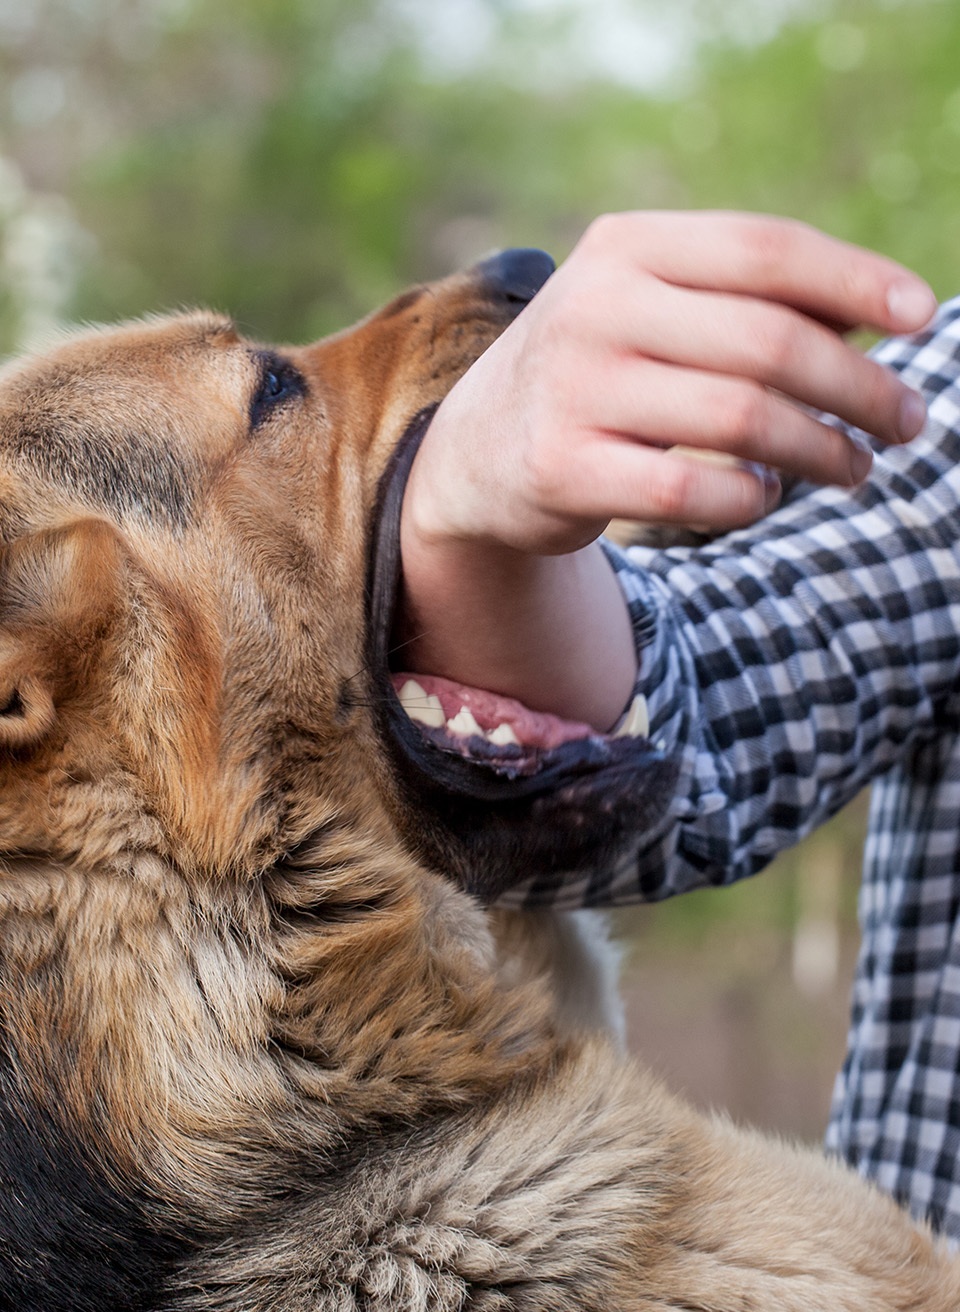 Closeup of a dog biting a person's arm.